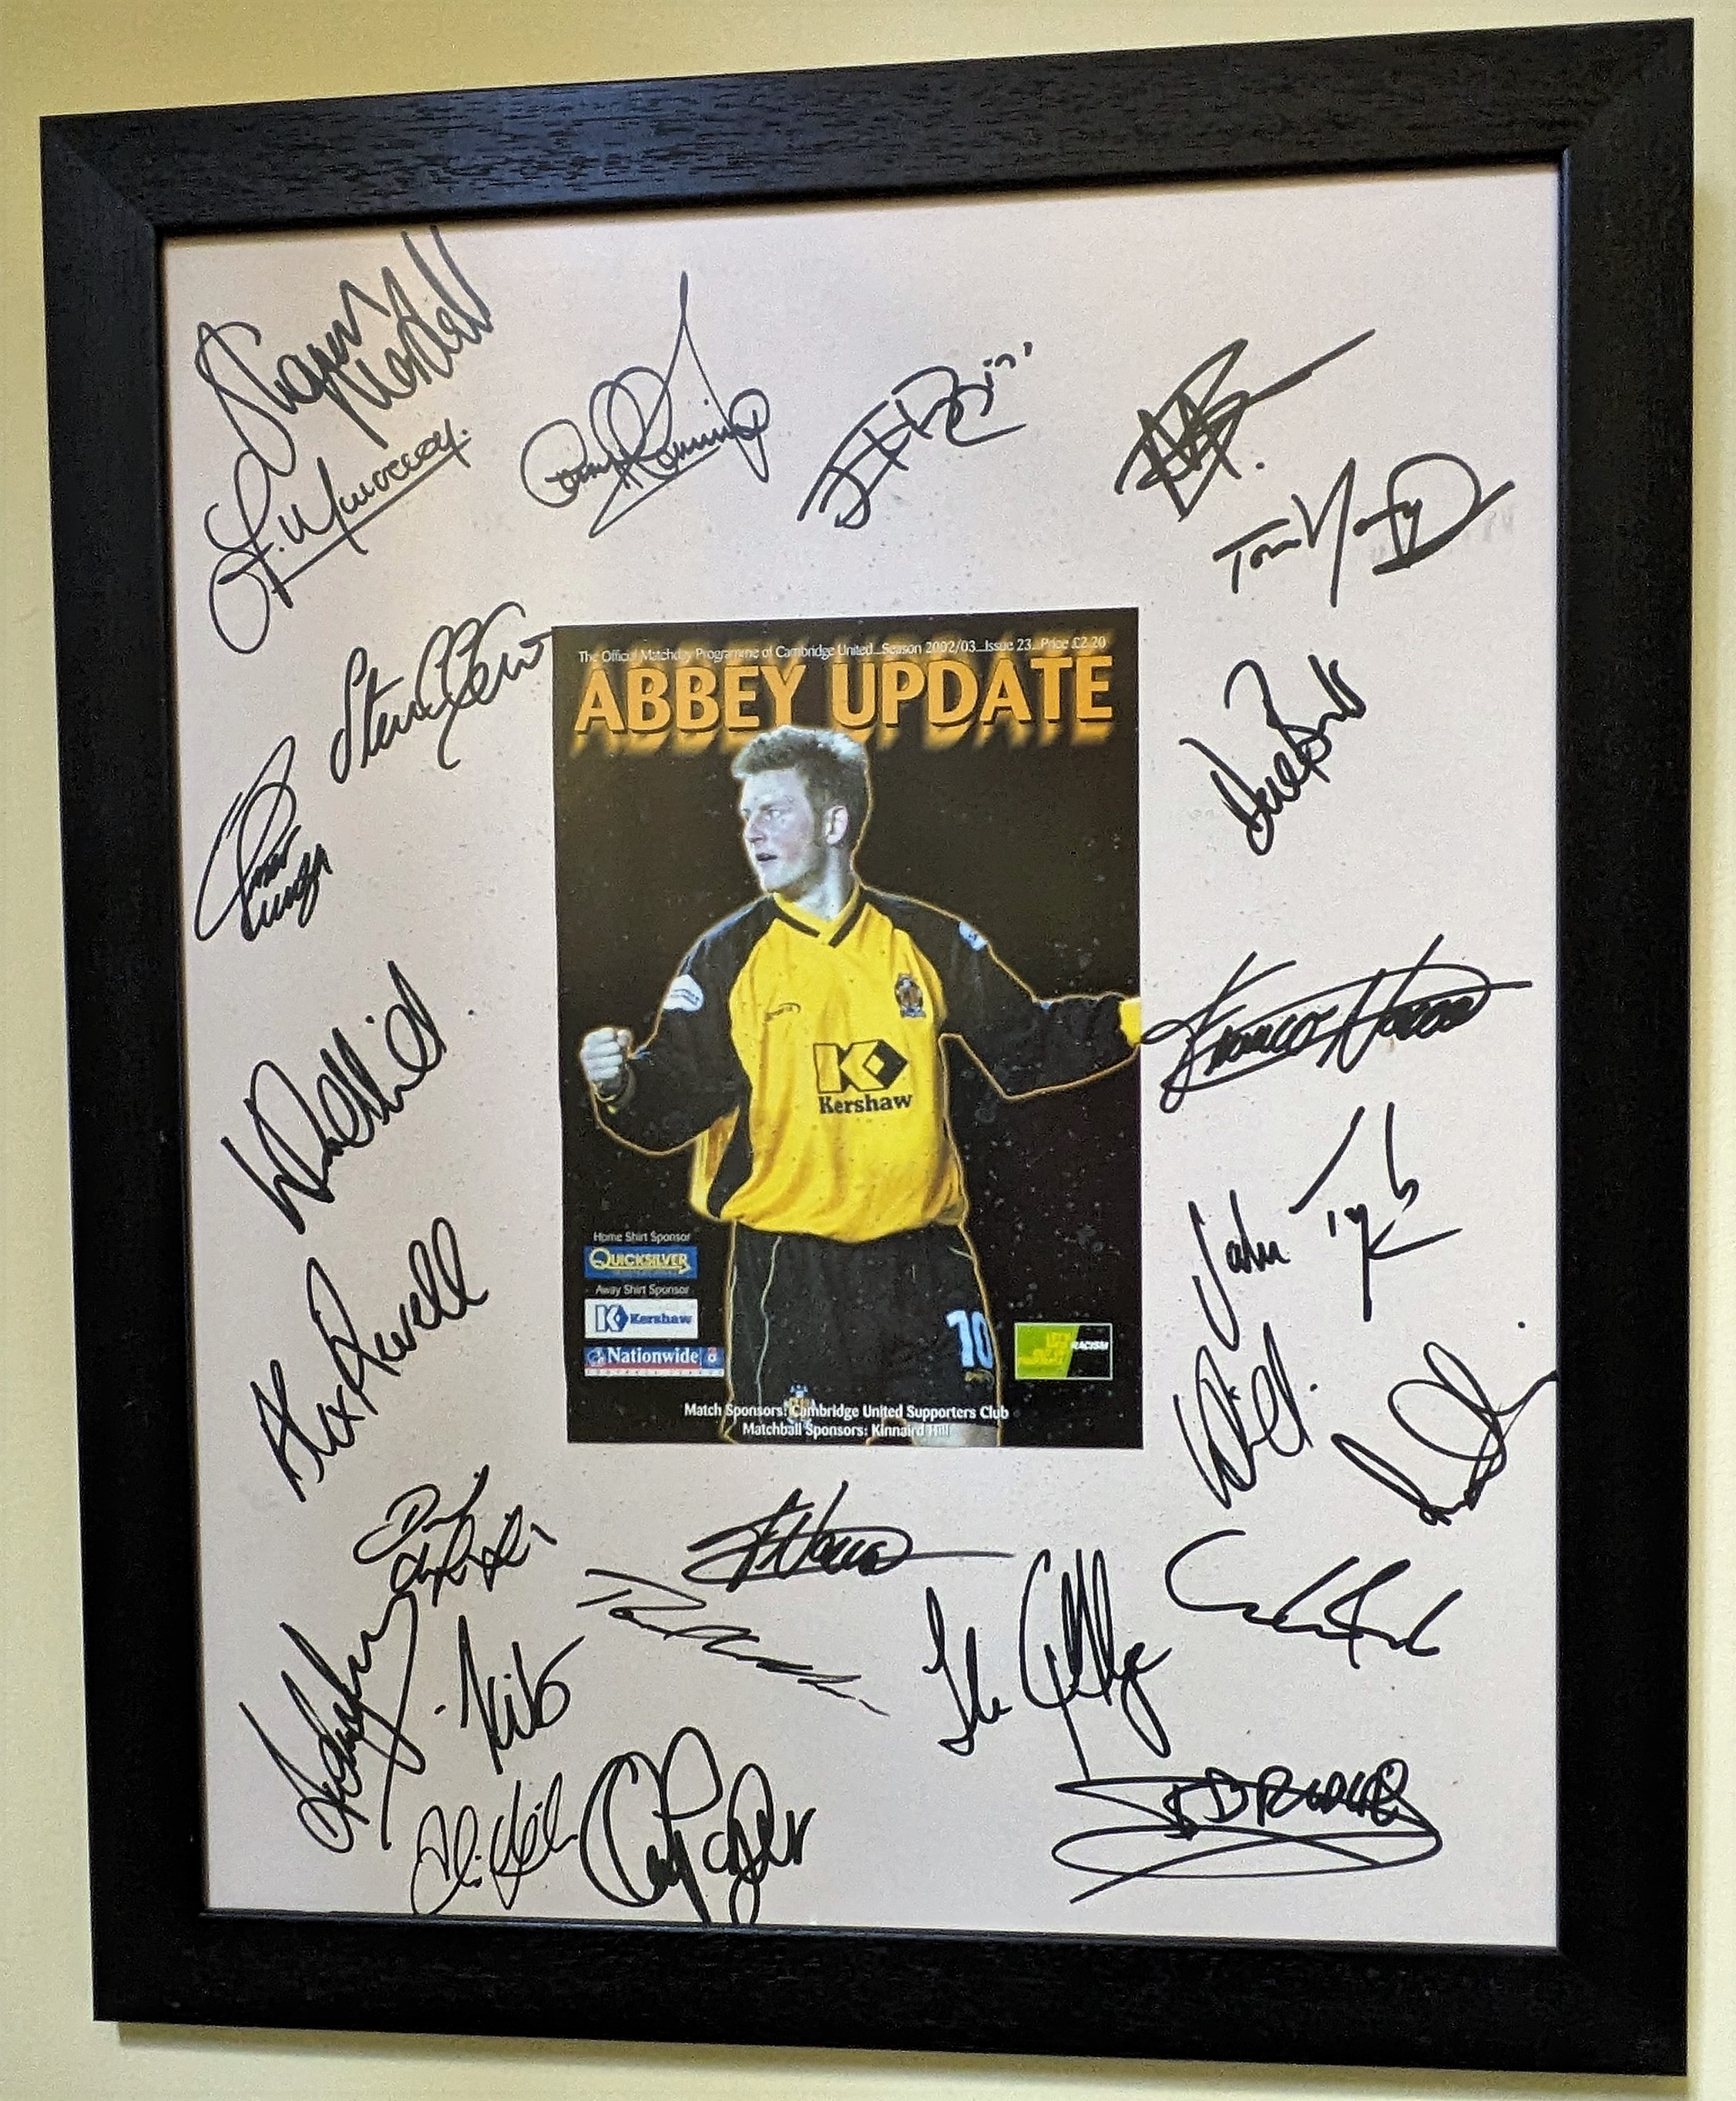 Close up photo of the framed retirement gift showing the players signatures